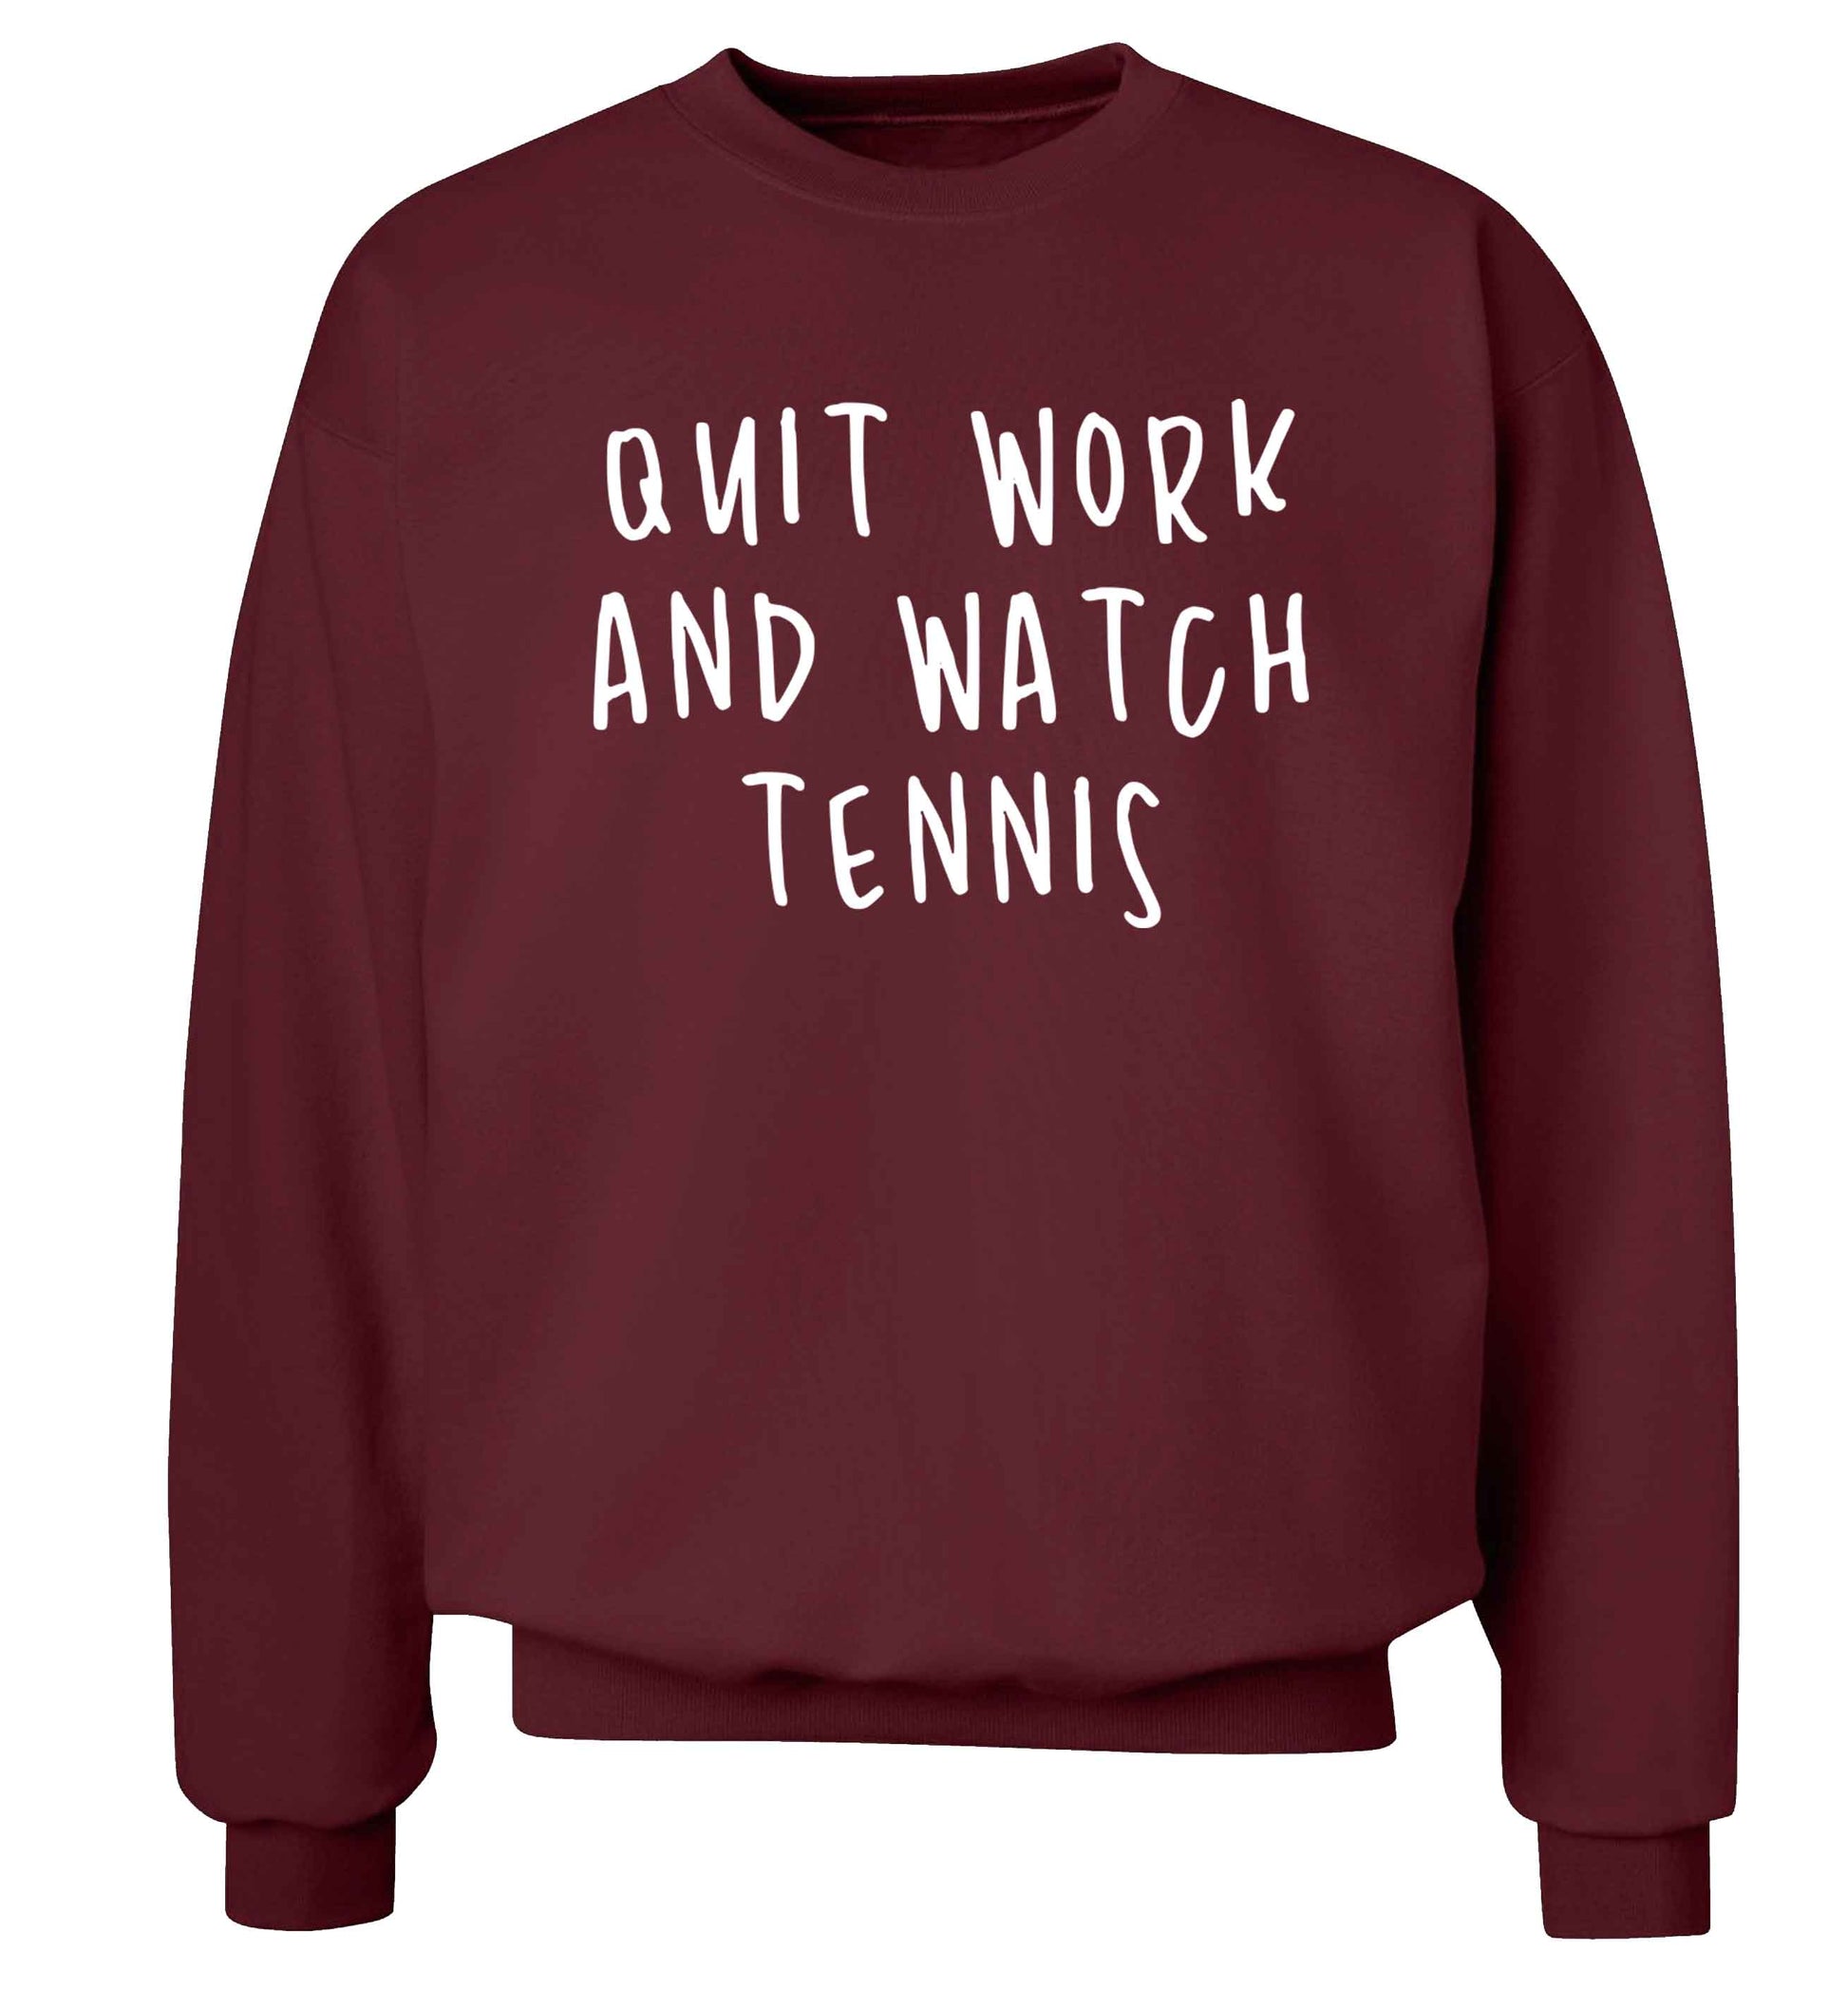 Quit work and watch tennis Adult's unisex maroon Sweater 2XL